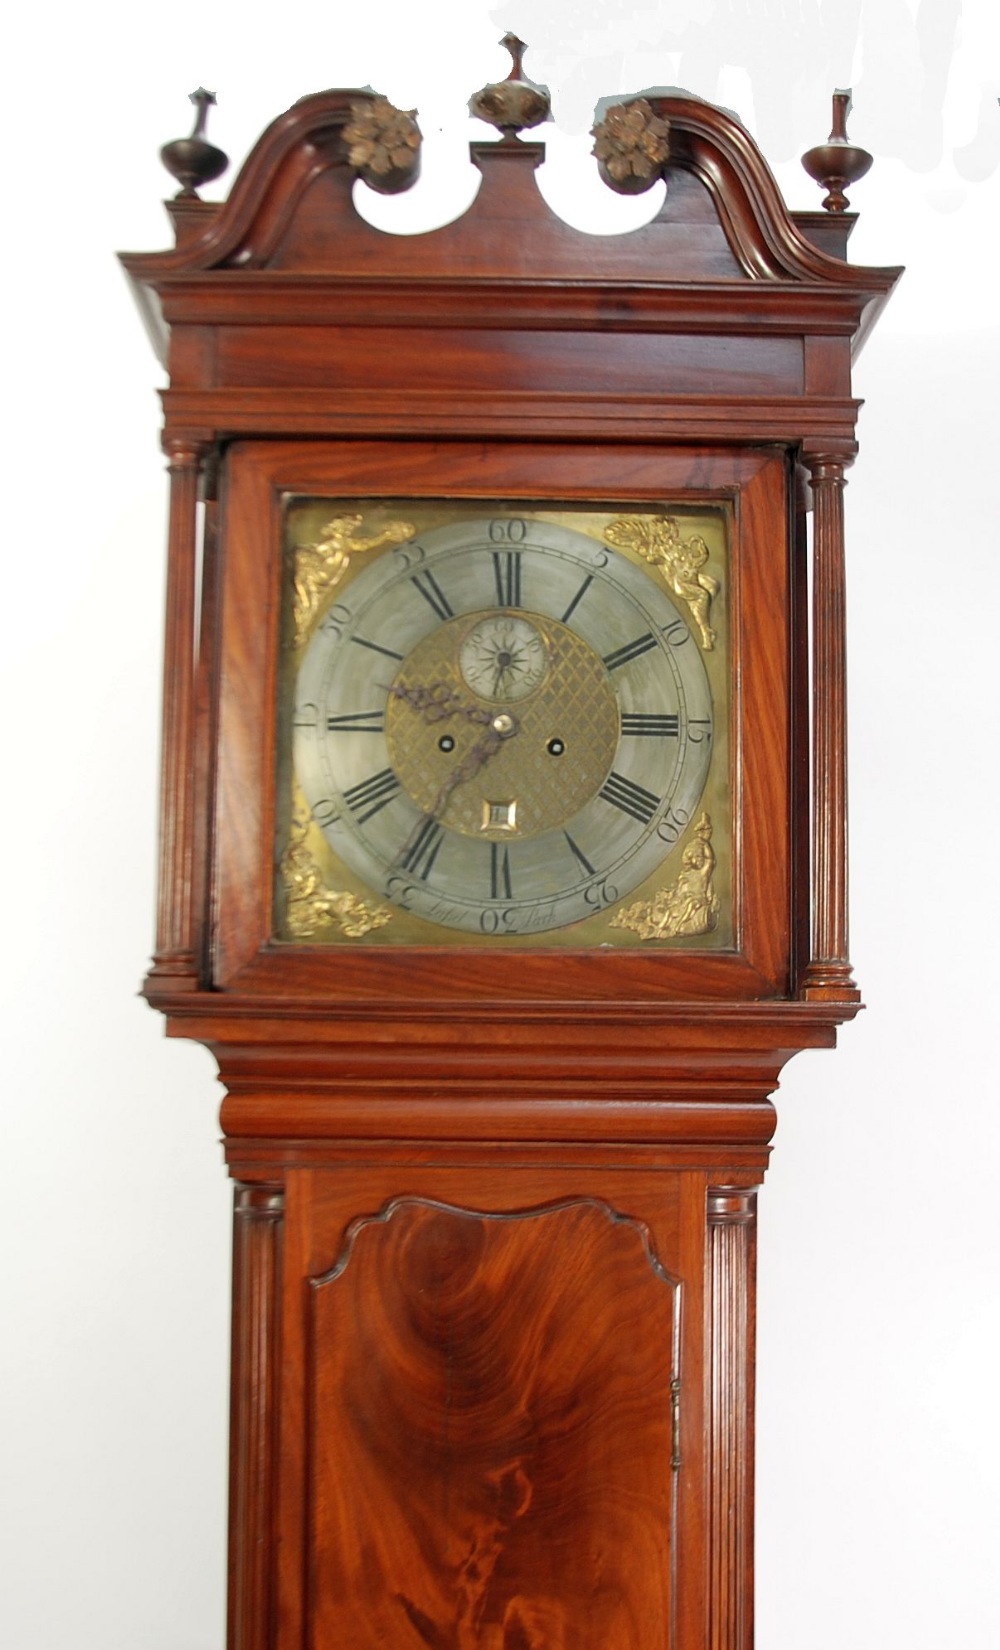 LATE EIGHTEENTH CENTURY MAHOGANY LONGCASE CLOCK, signed Lassel Park, the 13" brass dial with - Image 2 of 6